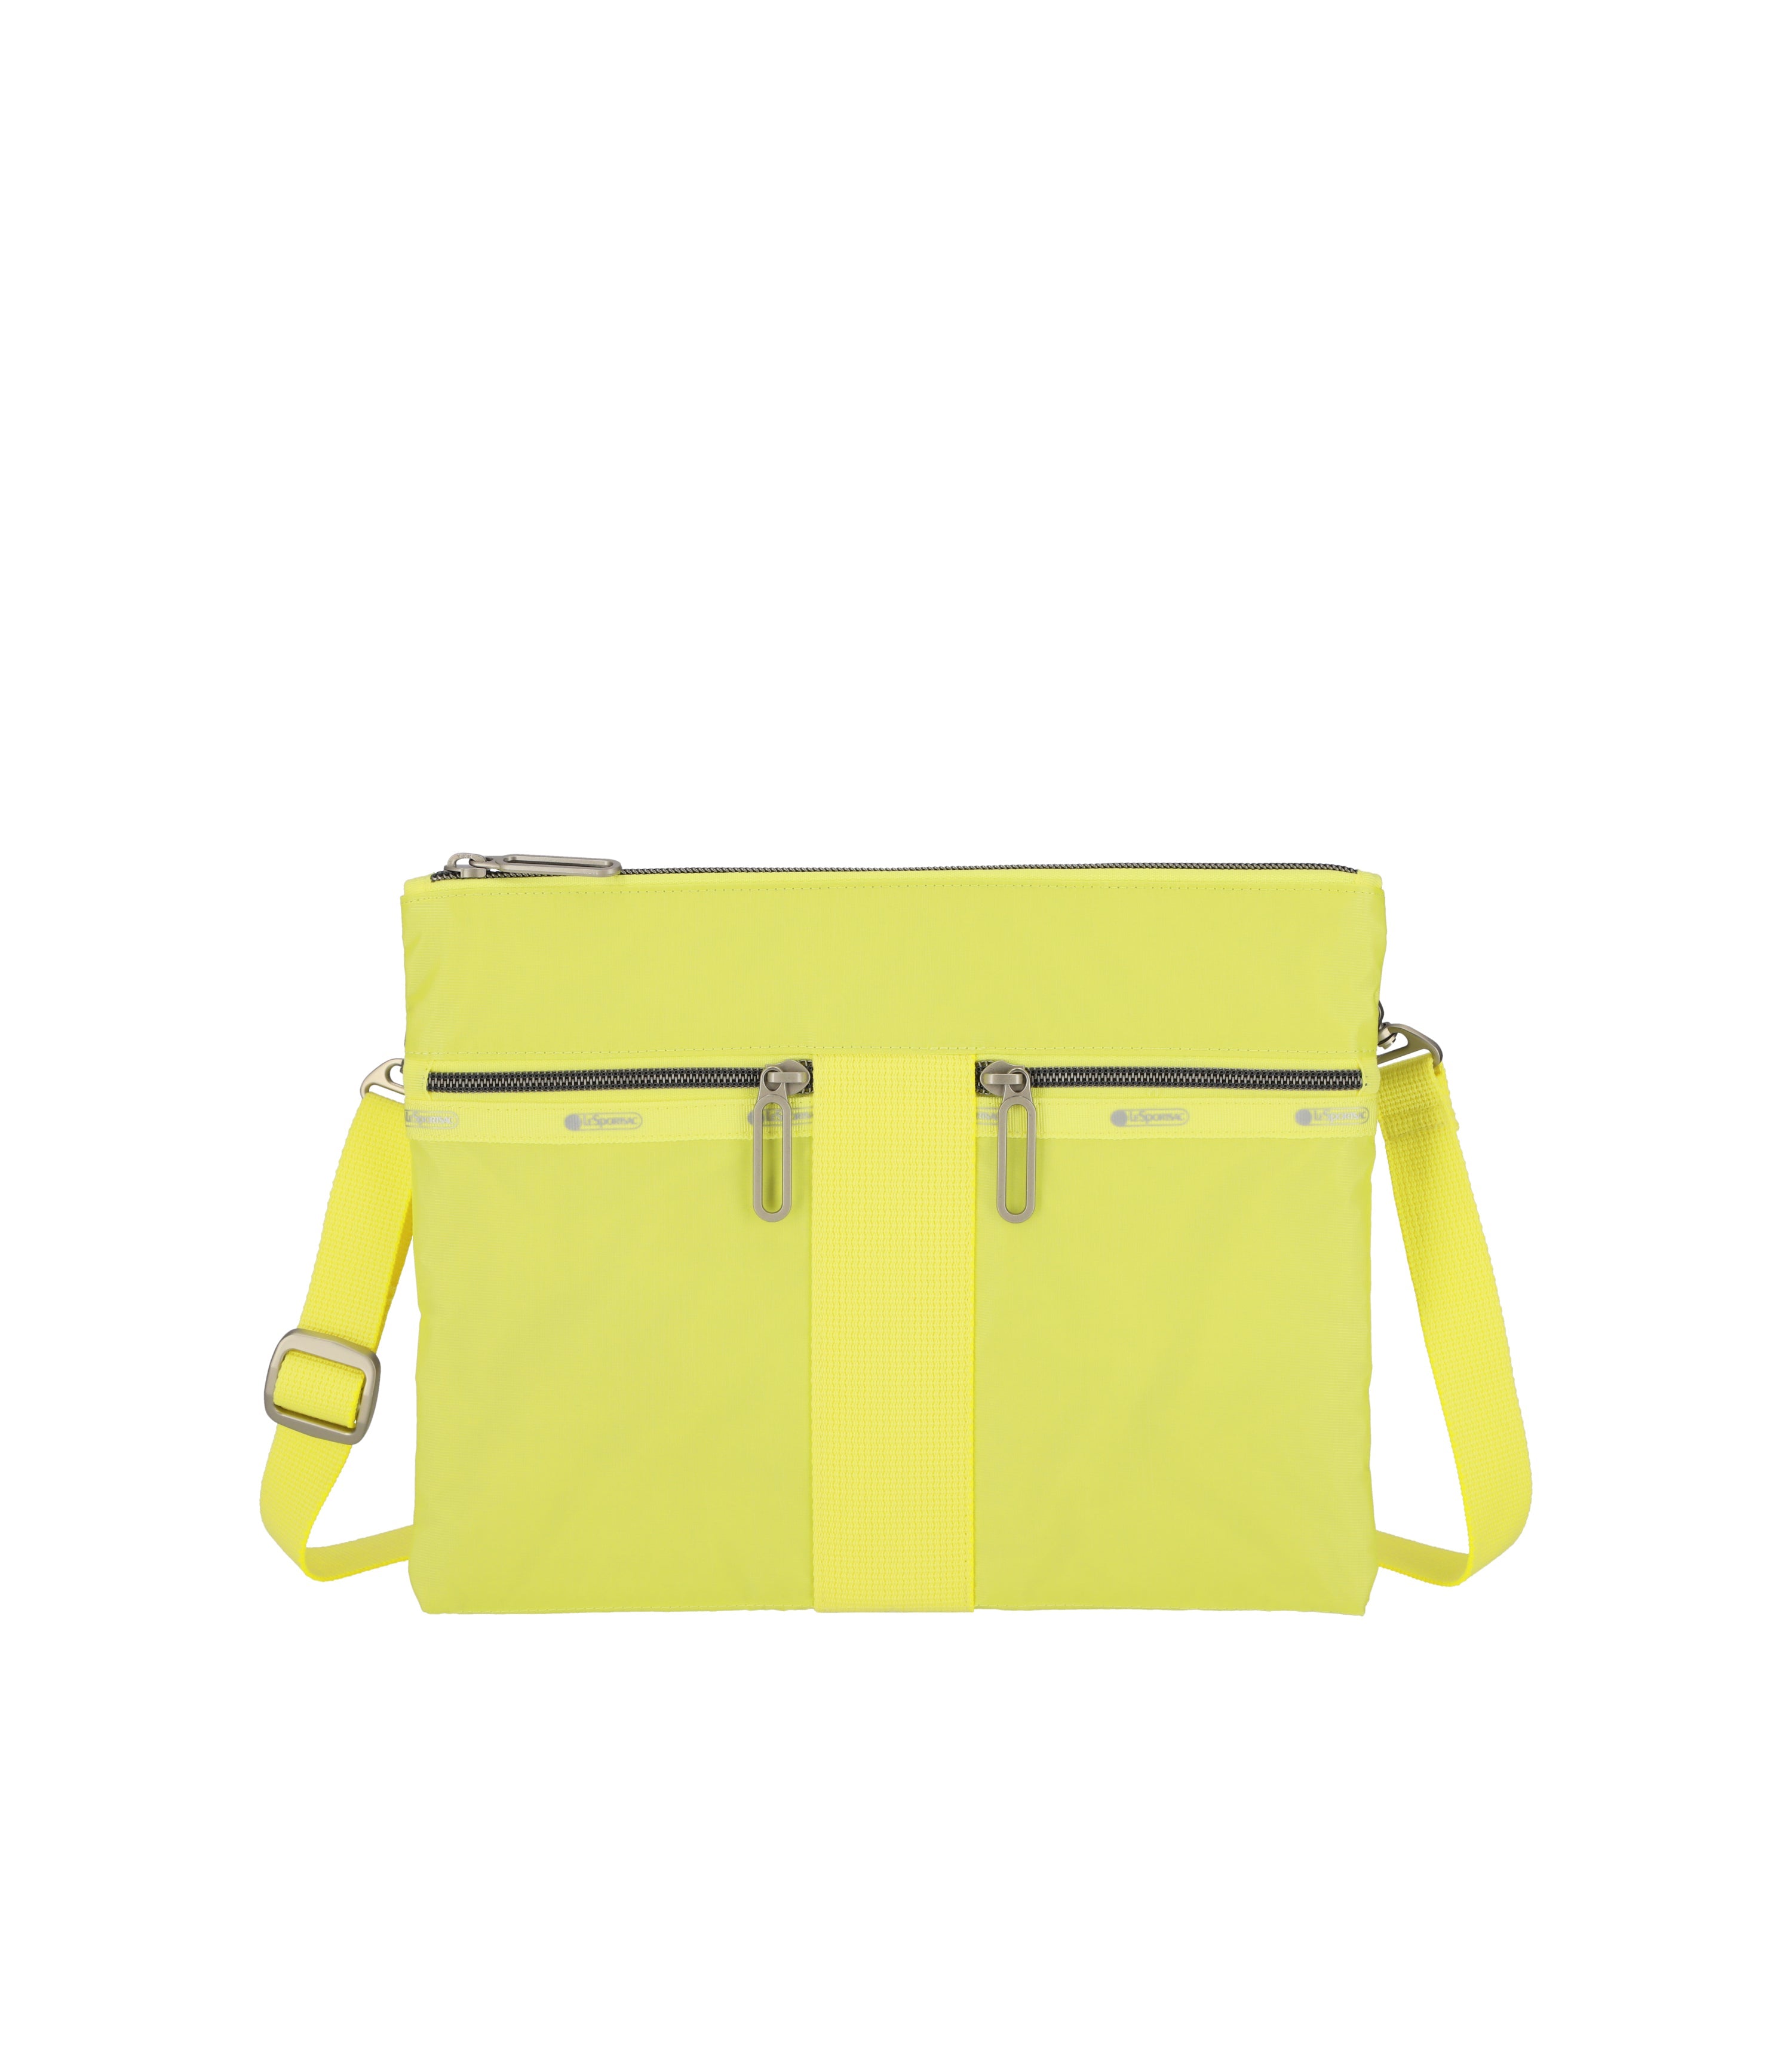 yellow | Casual outfits, Fashion, Bags